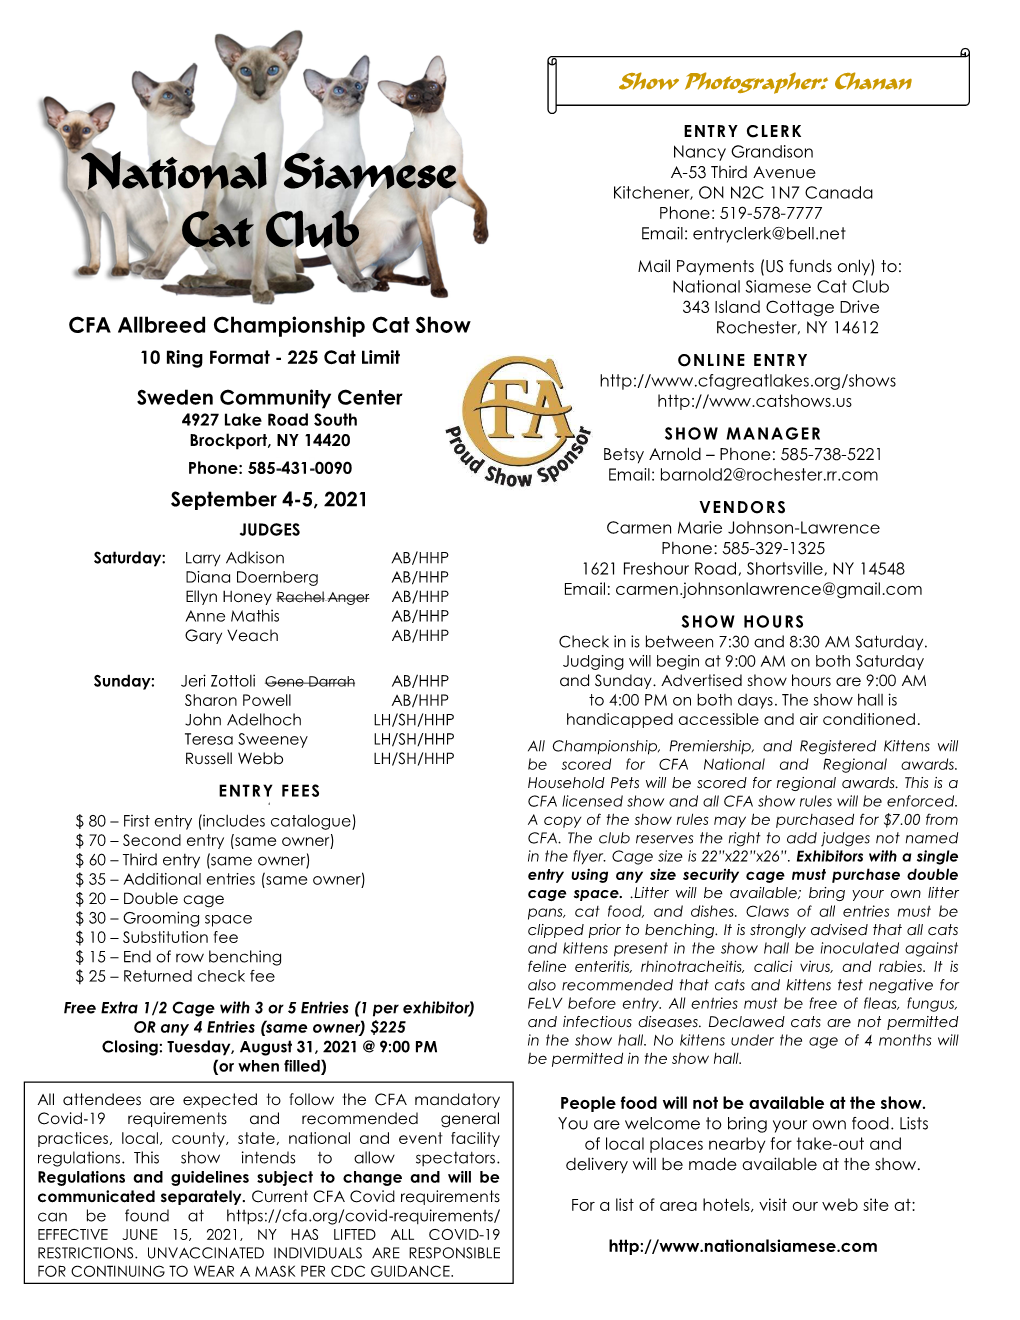 National Siamese Cat Club 343 Island Cottage Drive CFA Allbreed Championship Cat Show Rochester, NY 14612